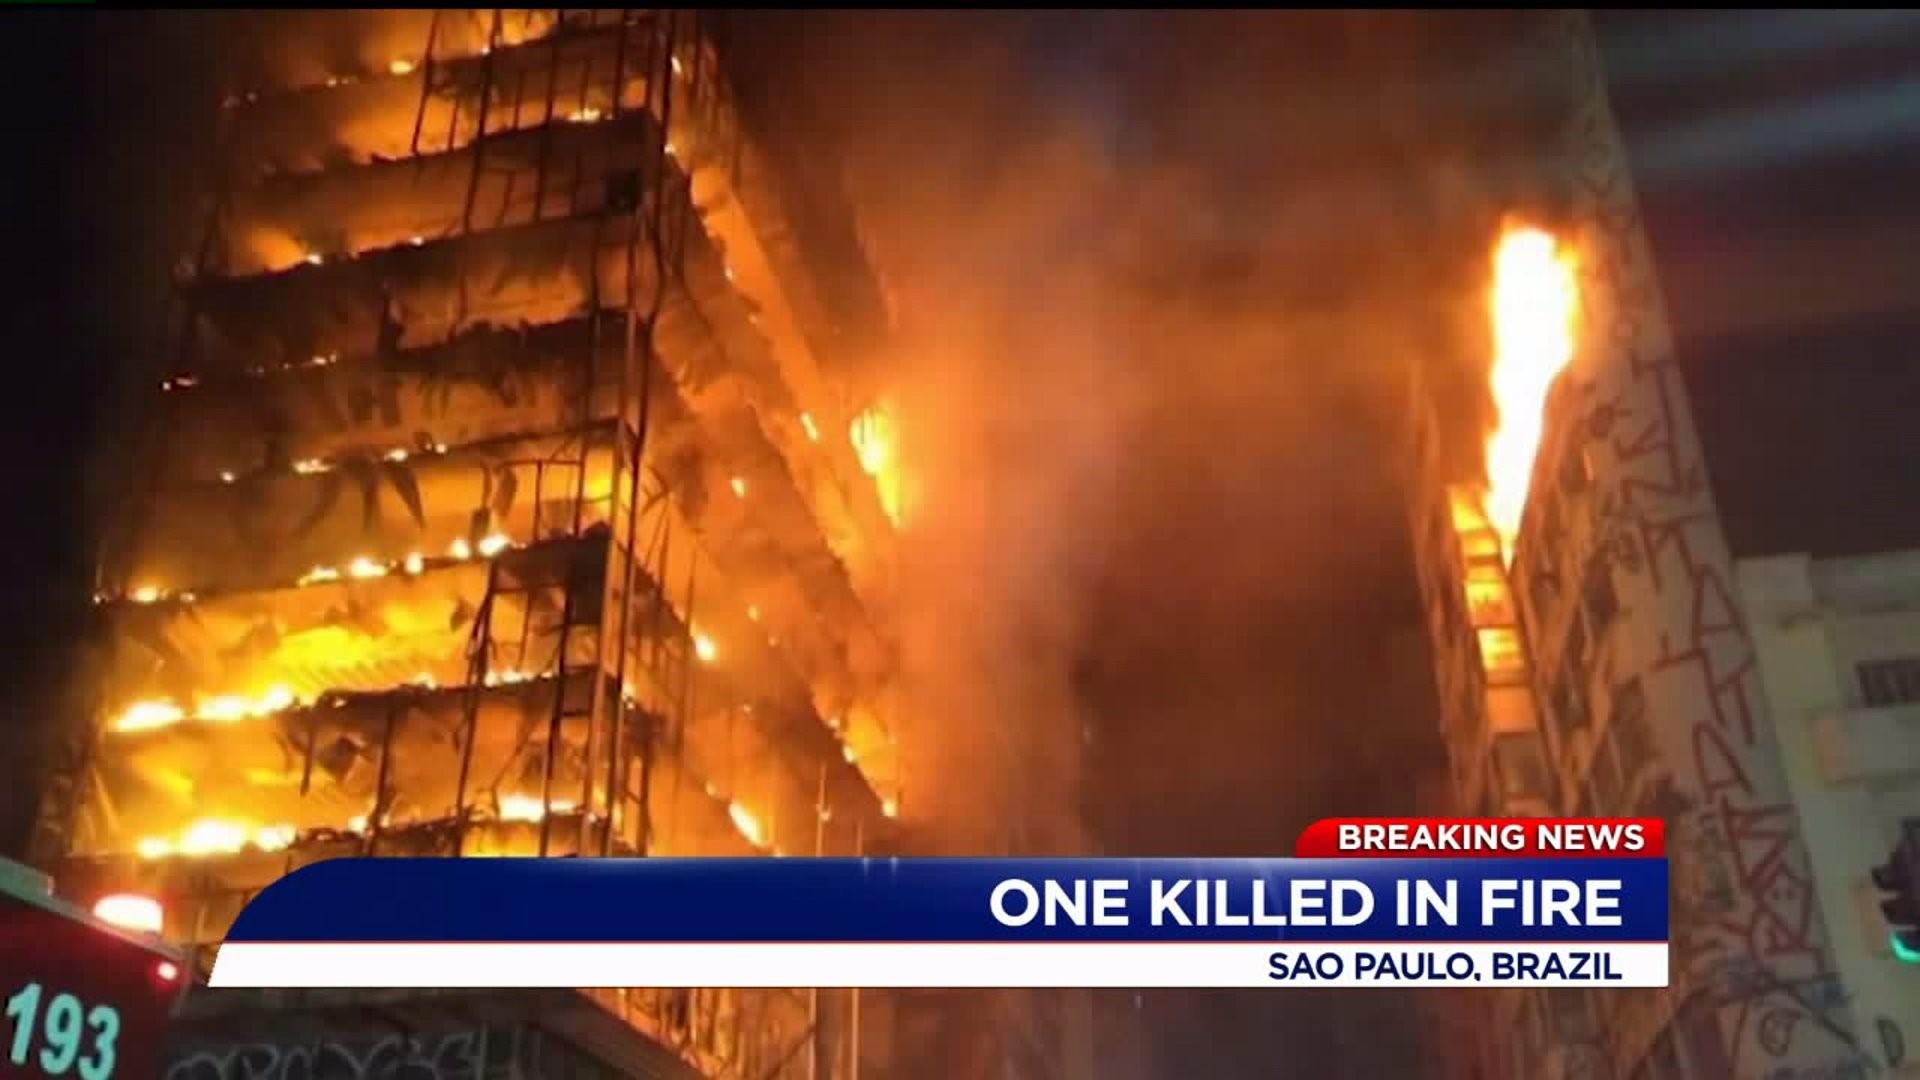 At Least One Person Dead in a Fire in Brazil